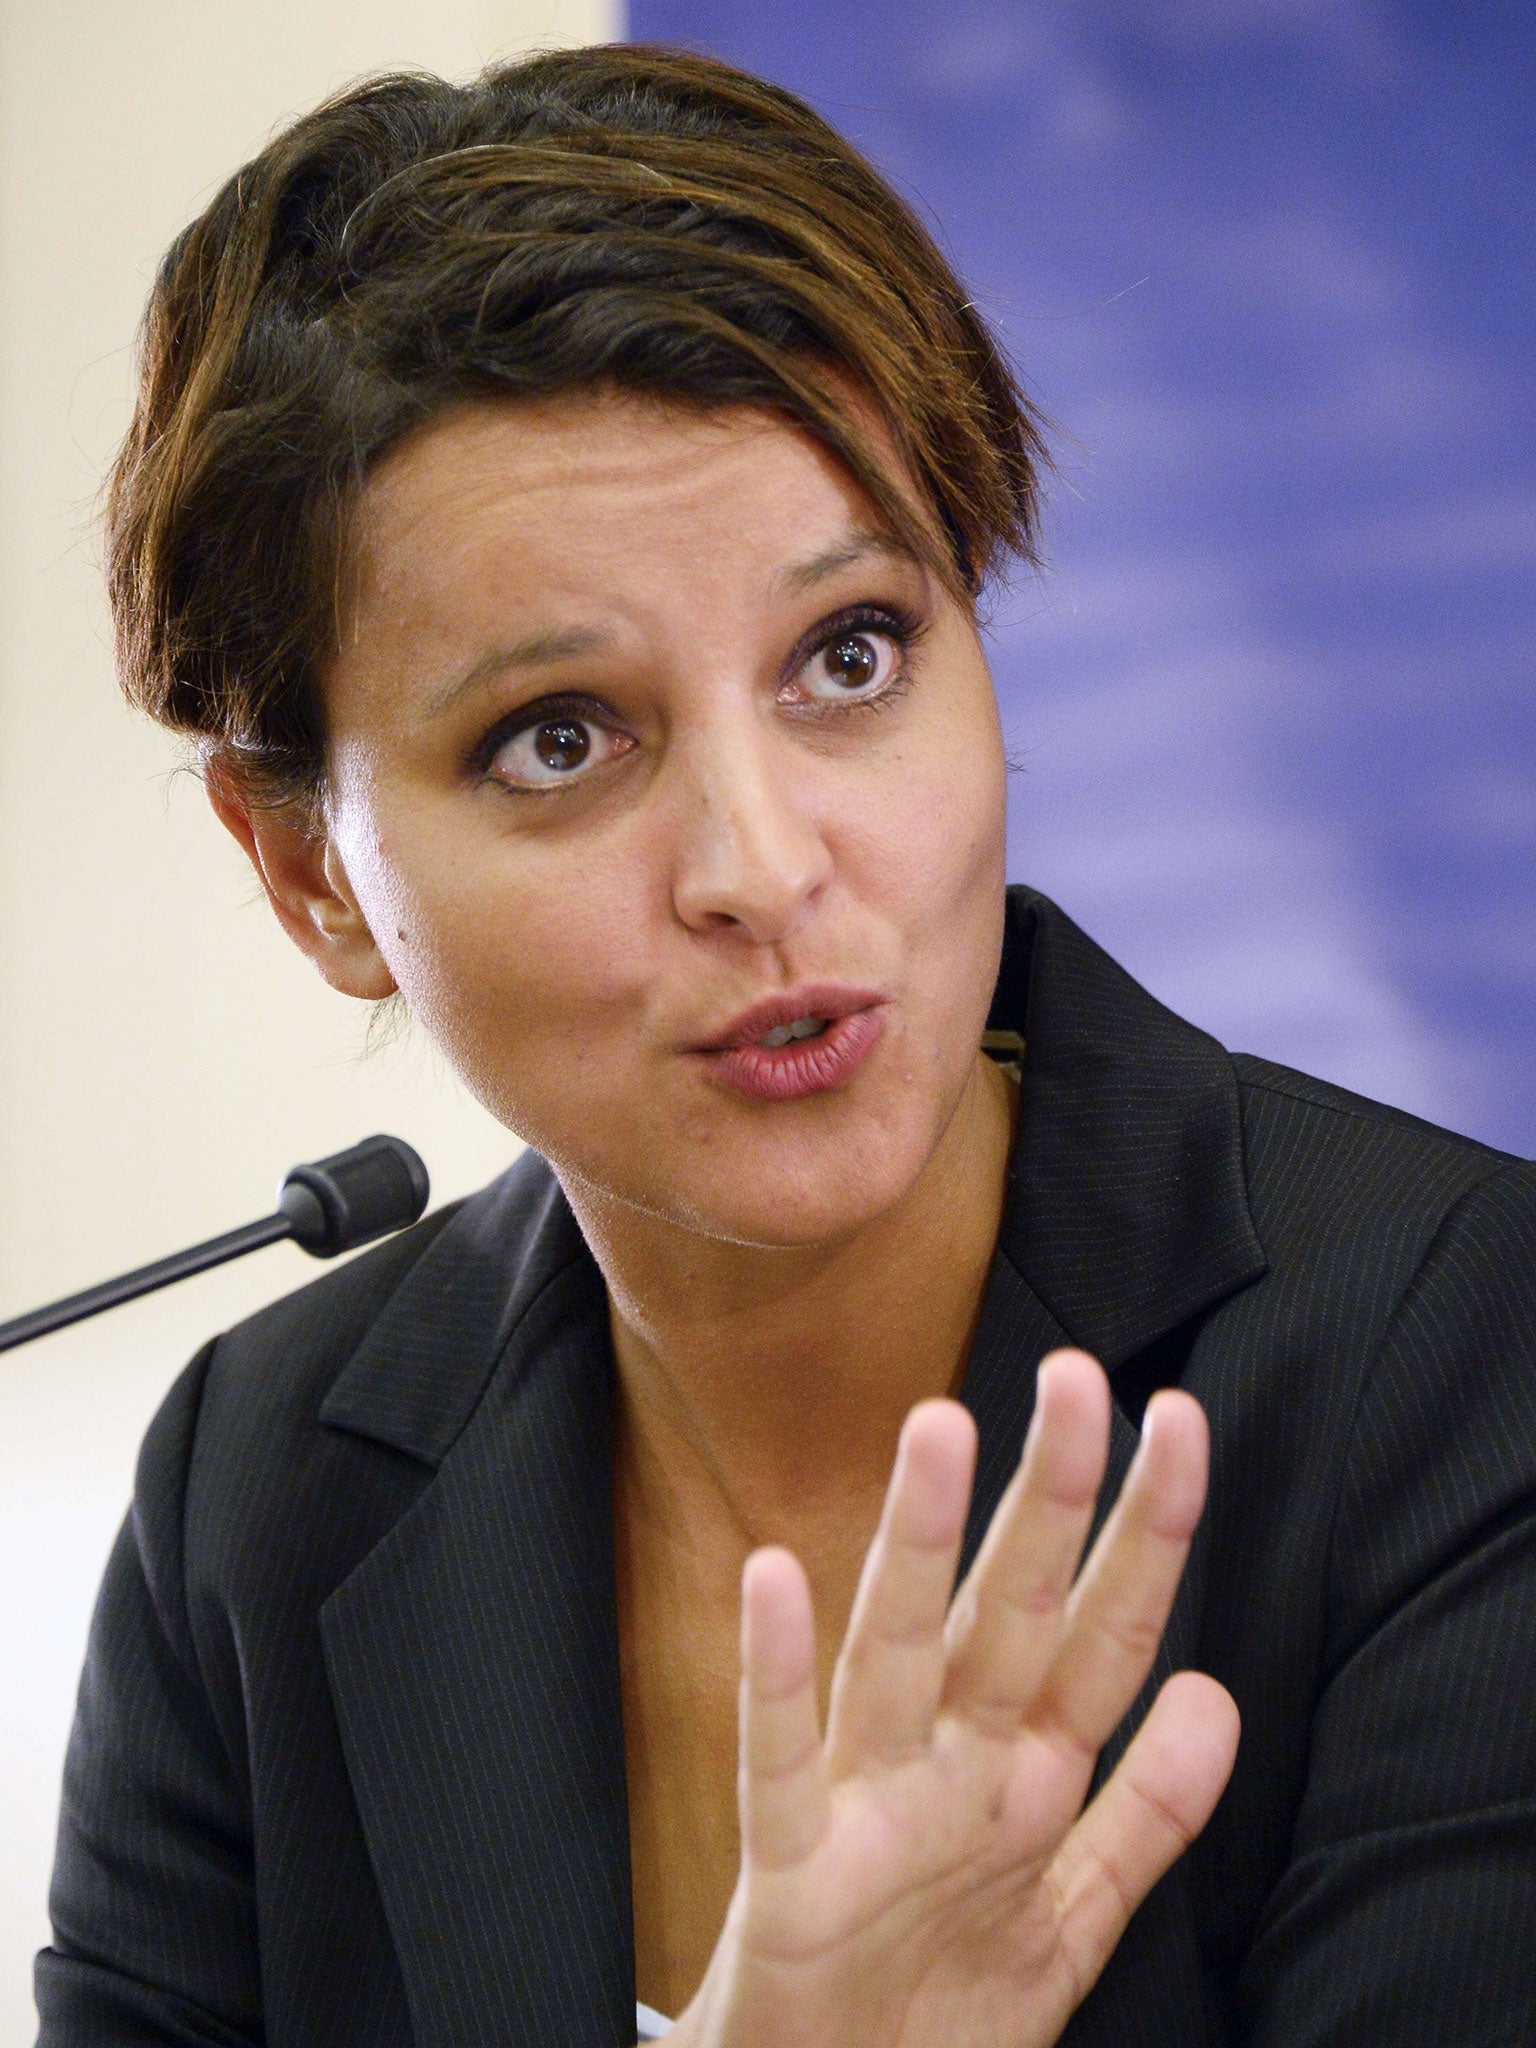 French Education minister Najat Vallaud-Belkacem has been besieged by racist and sexist comments and malicious rumours on social media